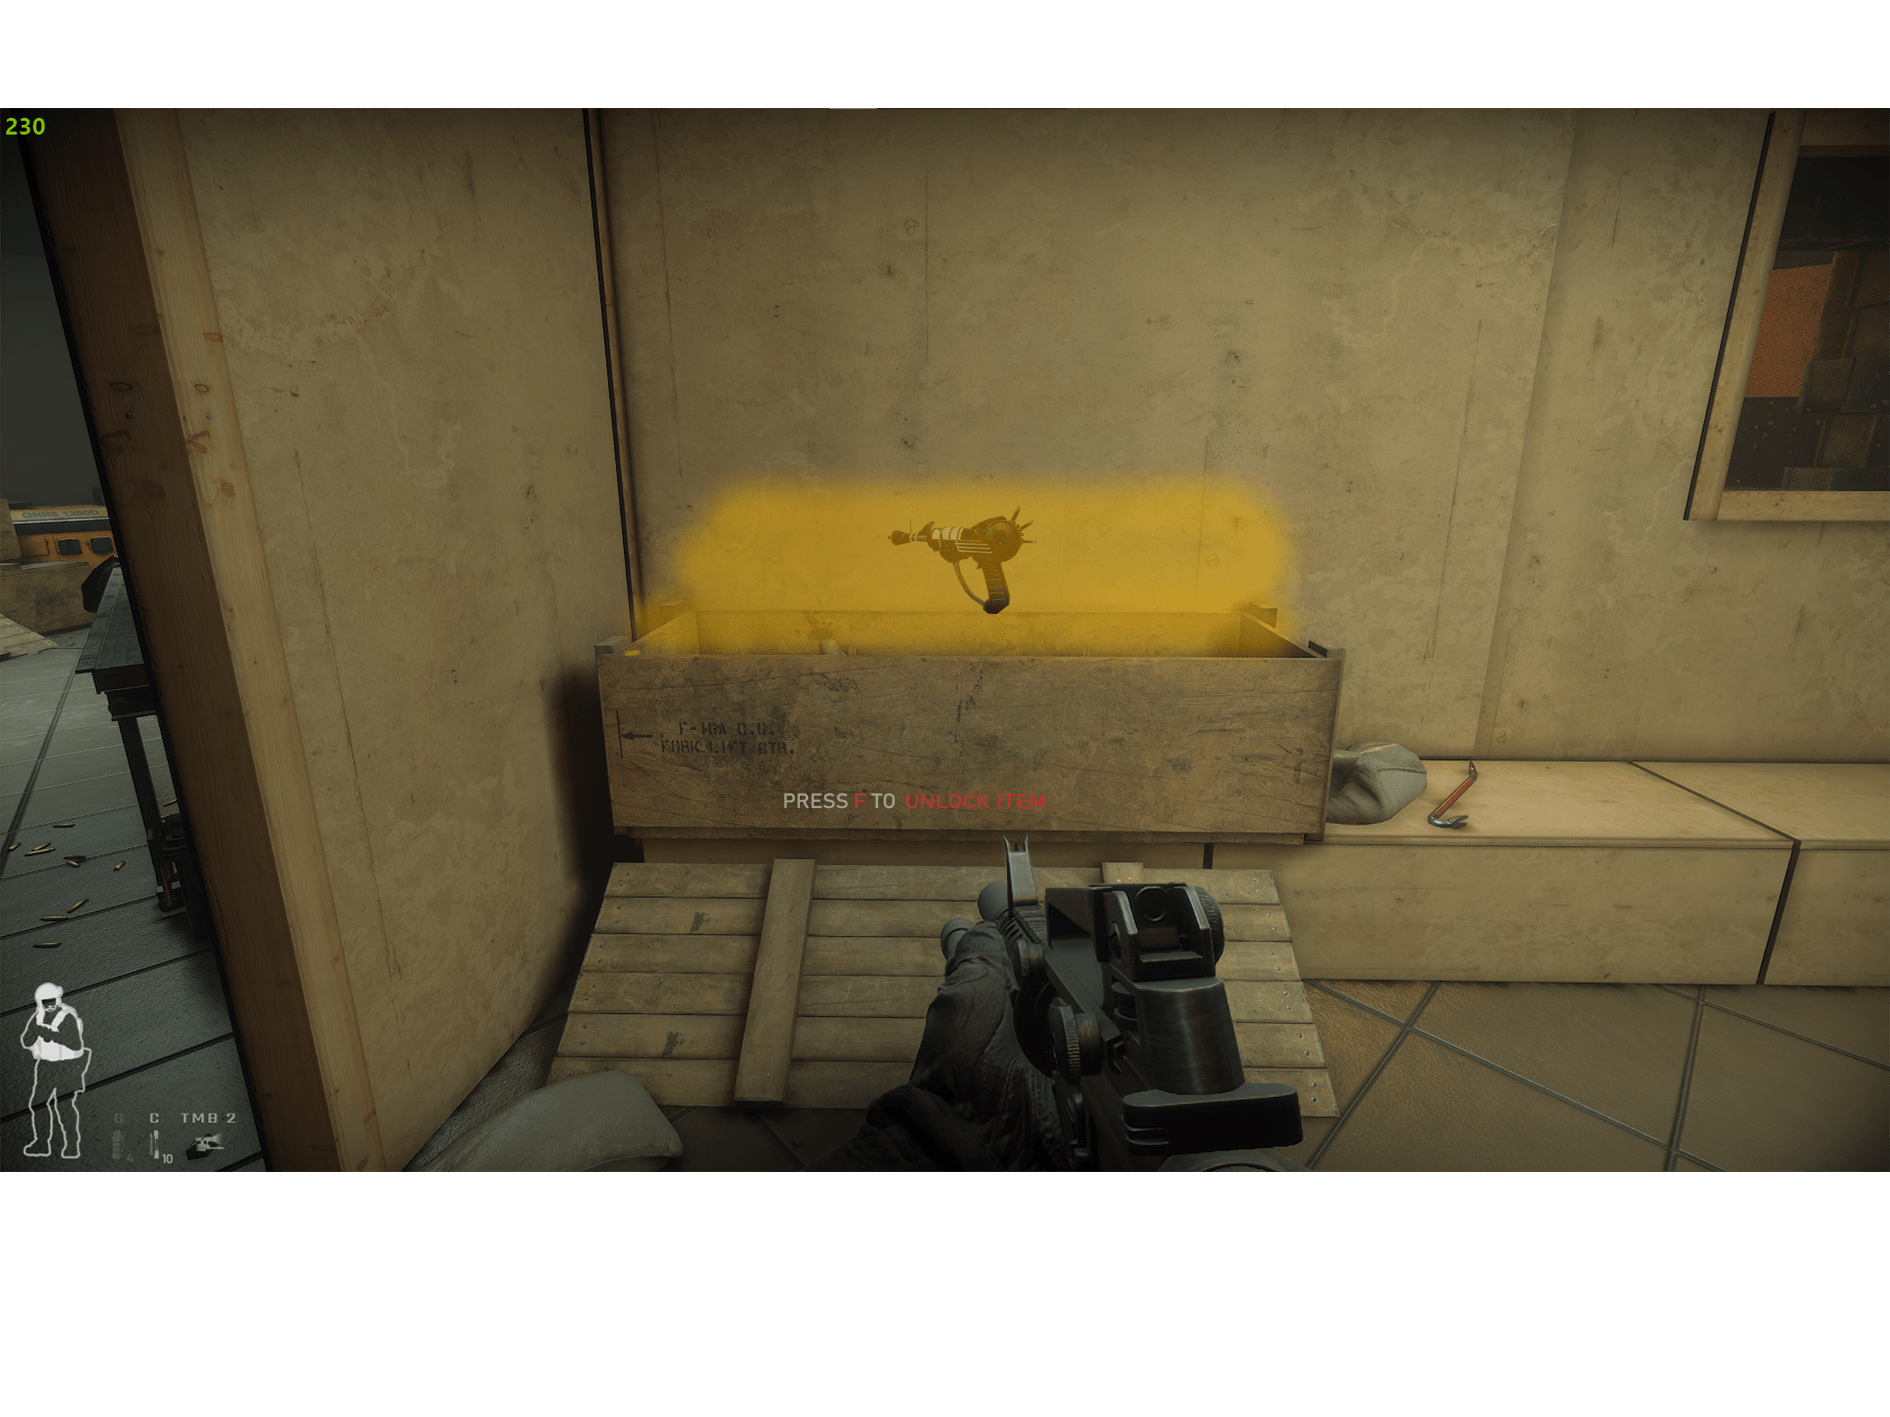 Unlock The Call Of Duty EasterEgg in game image 3